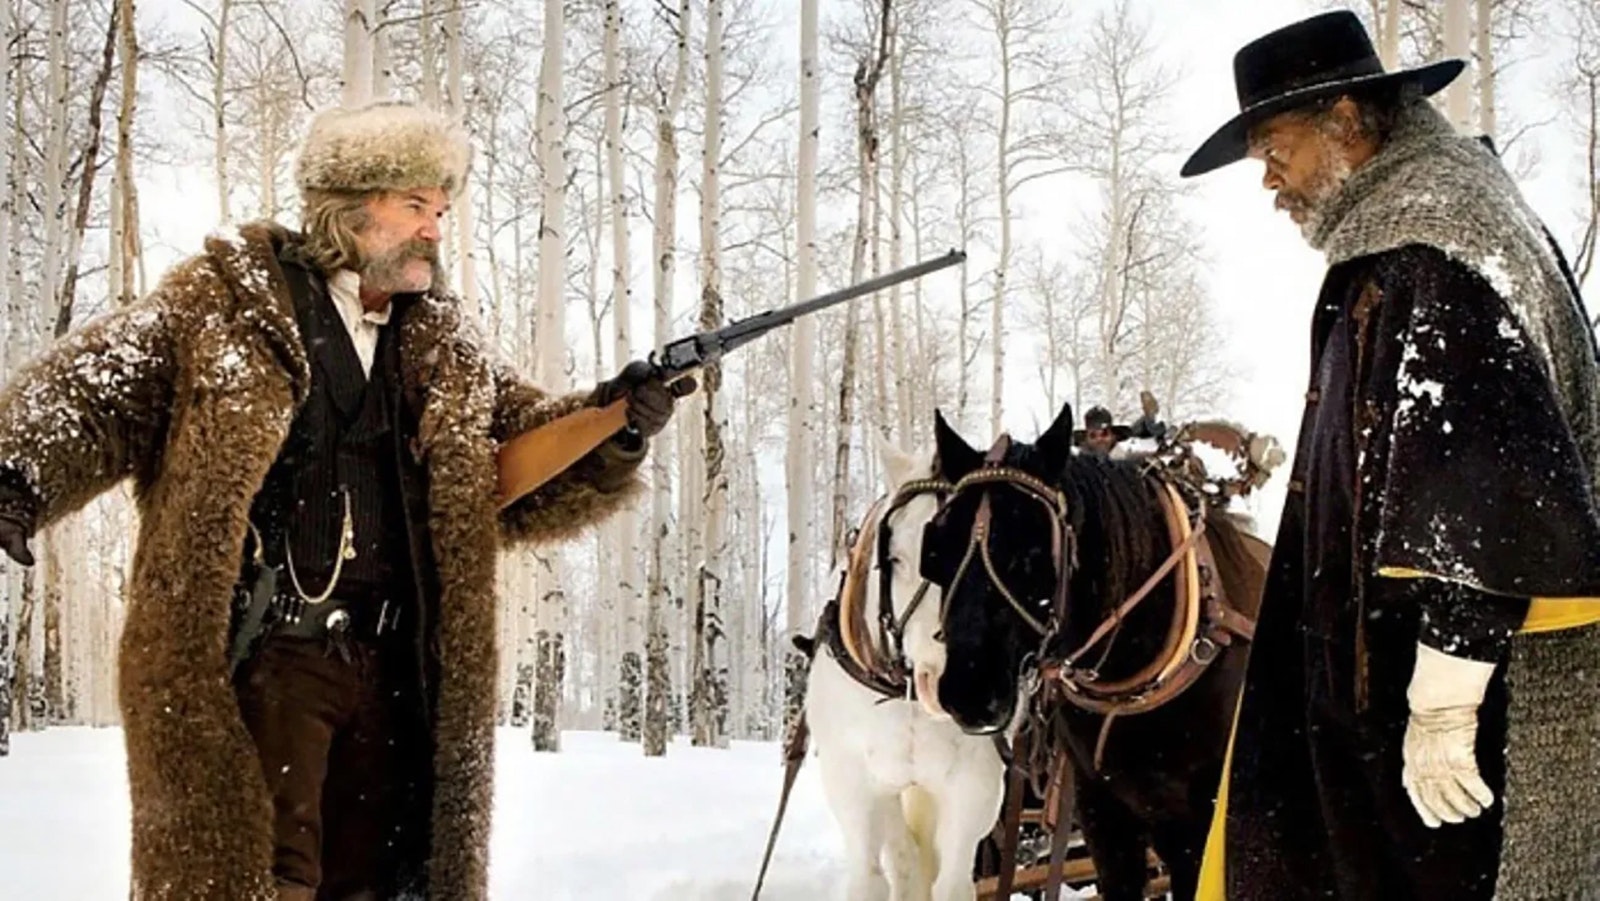 The unique and authentic buffalo hide coats worn by actors in "The Hateful Eight" were made by Merlin Heinze at Merlin's Hide Out in Thermopolis, Wyoming.